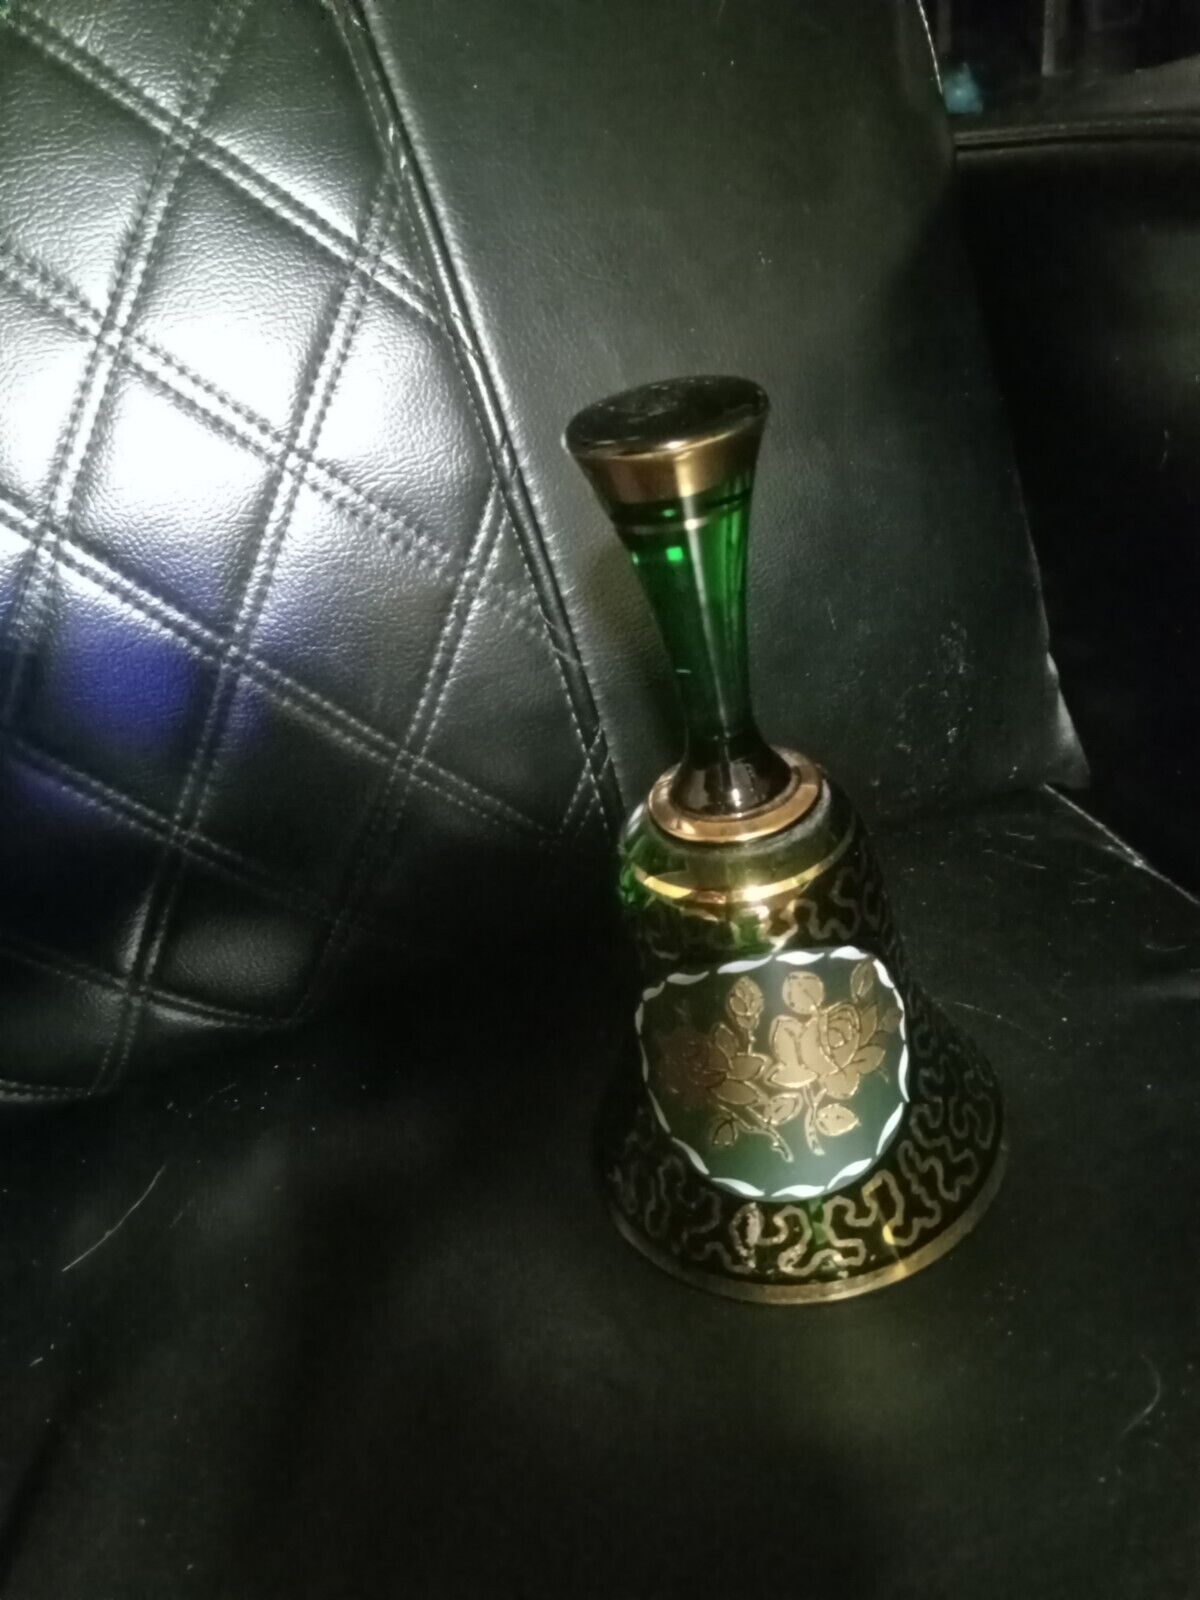 Vintage Green Glass Bell